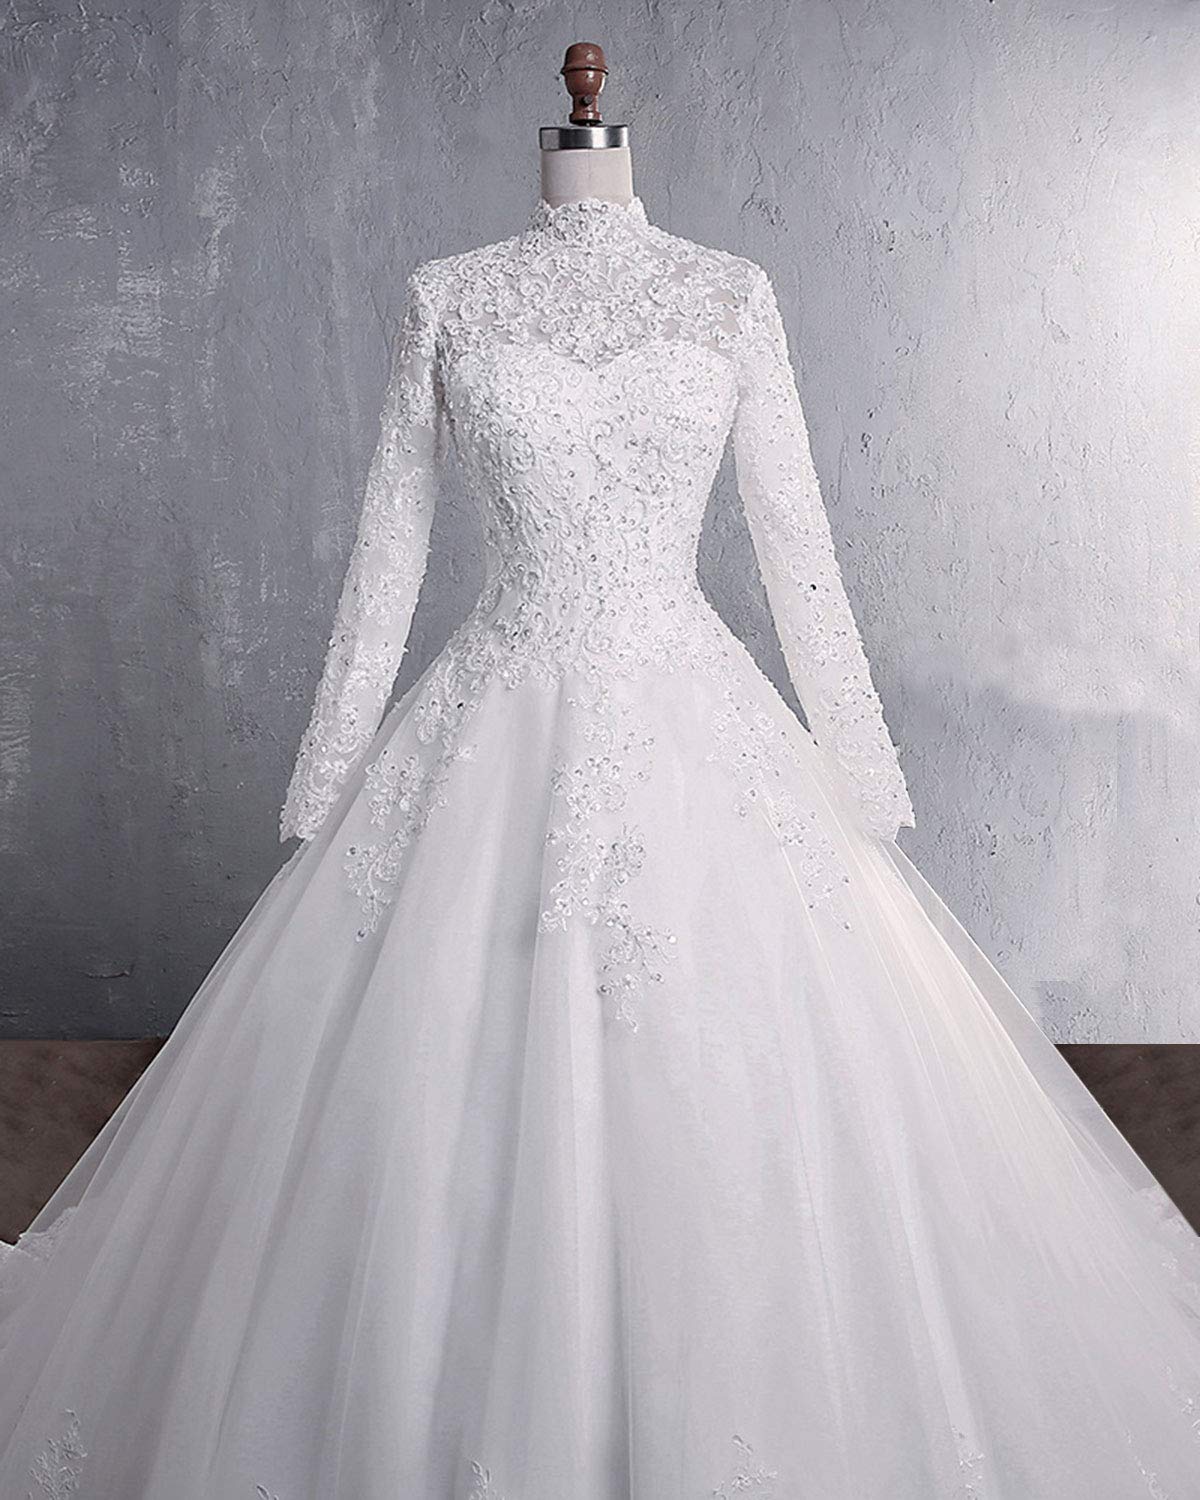 Ever-Beauty Women's White Lace Wedding Dress Long Sleeve Vintage Bridal Gowns